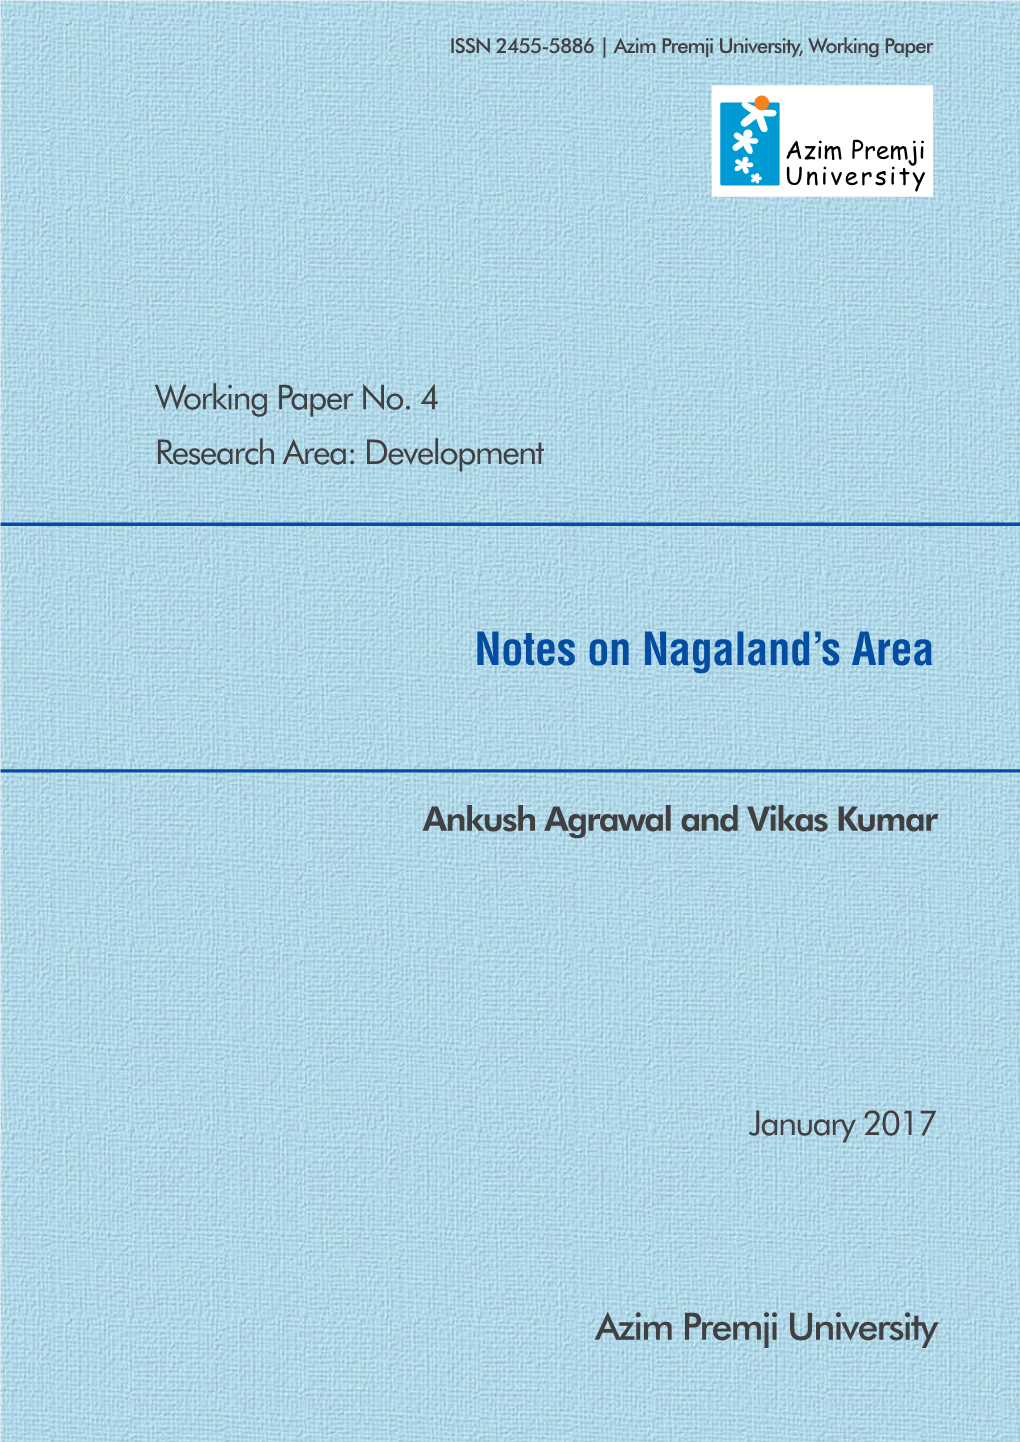 Notes on Nagaland's Area